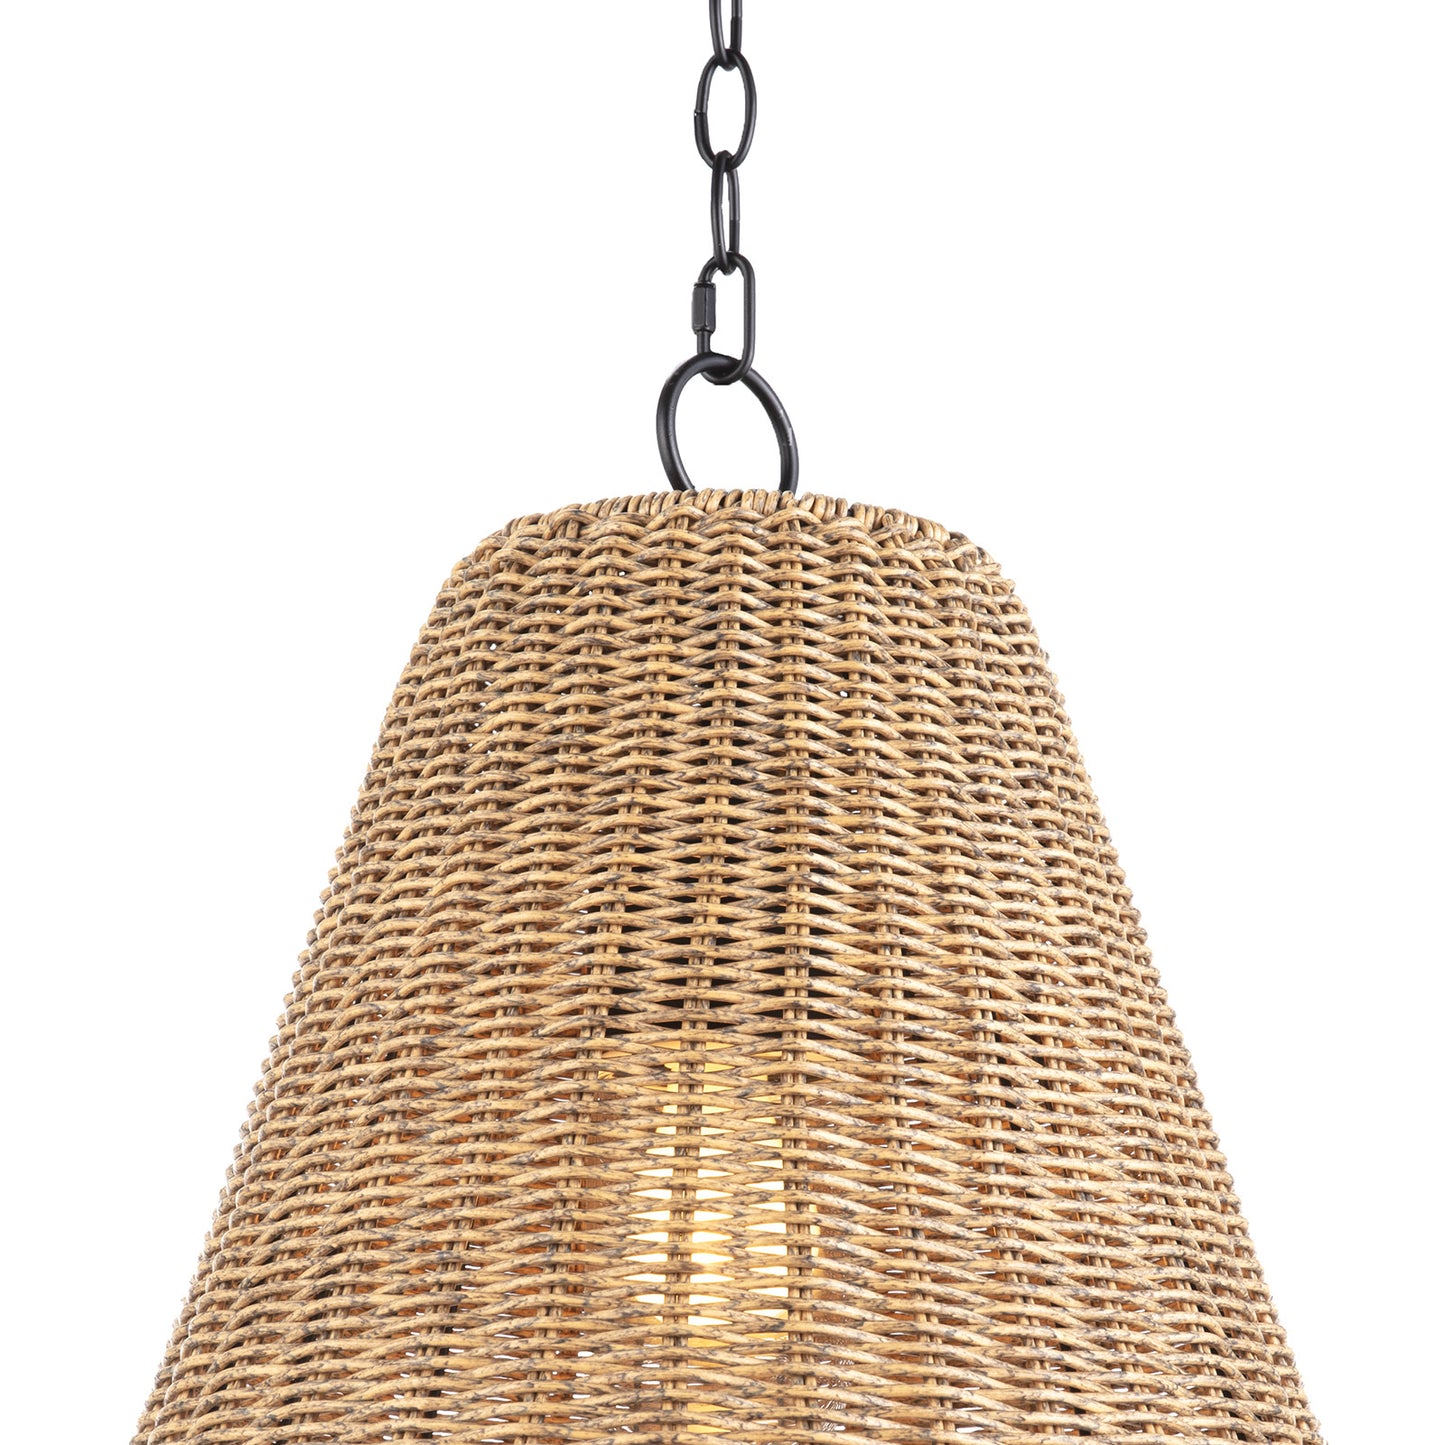 Summer Outdoor Pendant Small in Weathered Natural by Coastal Living